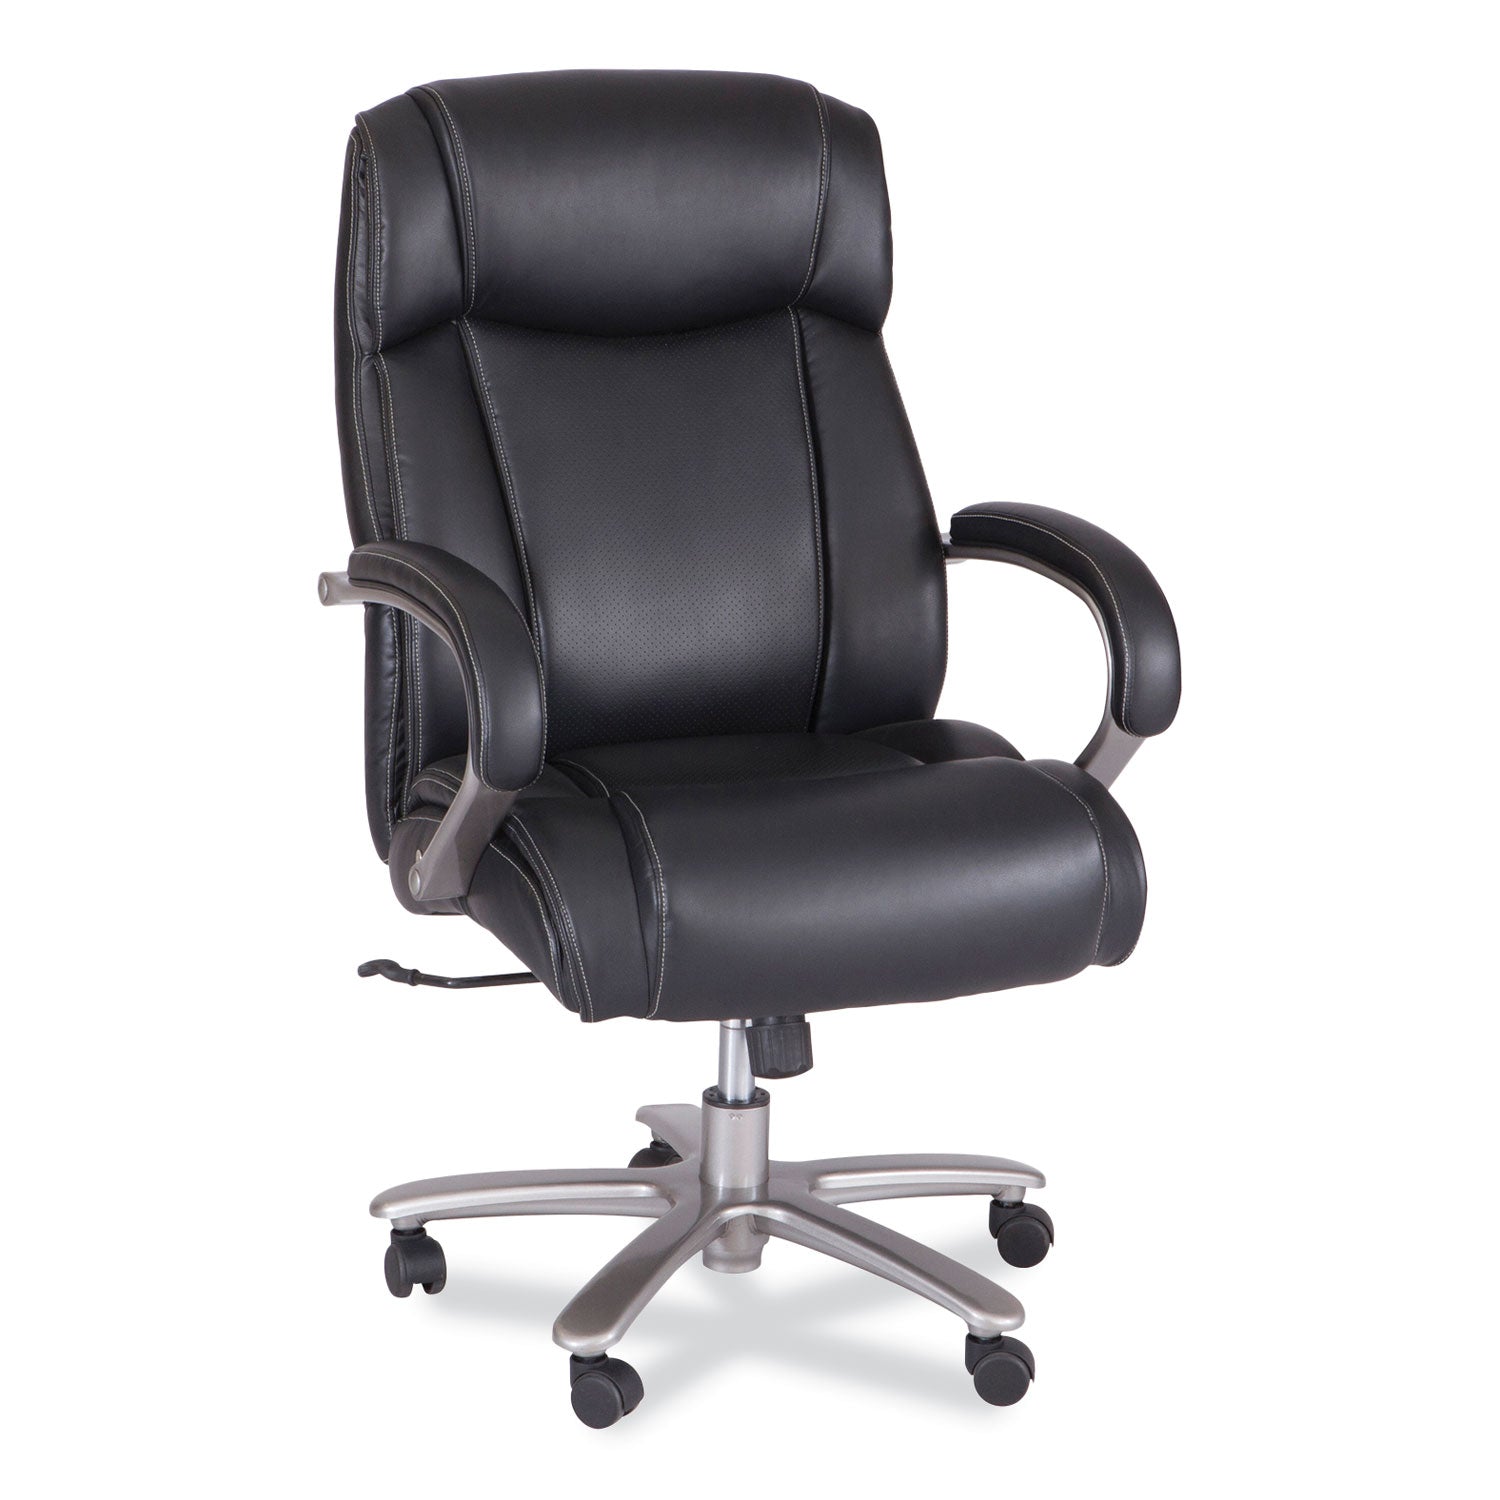 lineage-big-&-tall-high-back-task-chair-max-500-lb-205-to-2425-high-black-seat-chrome-base-ships-in-1-3-business-days_saf3502bl - 1